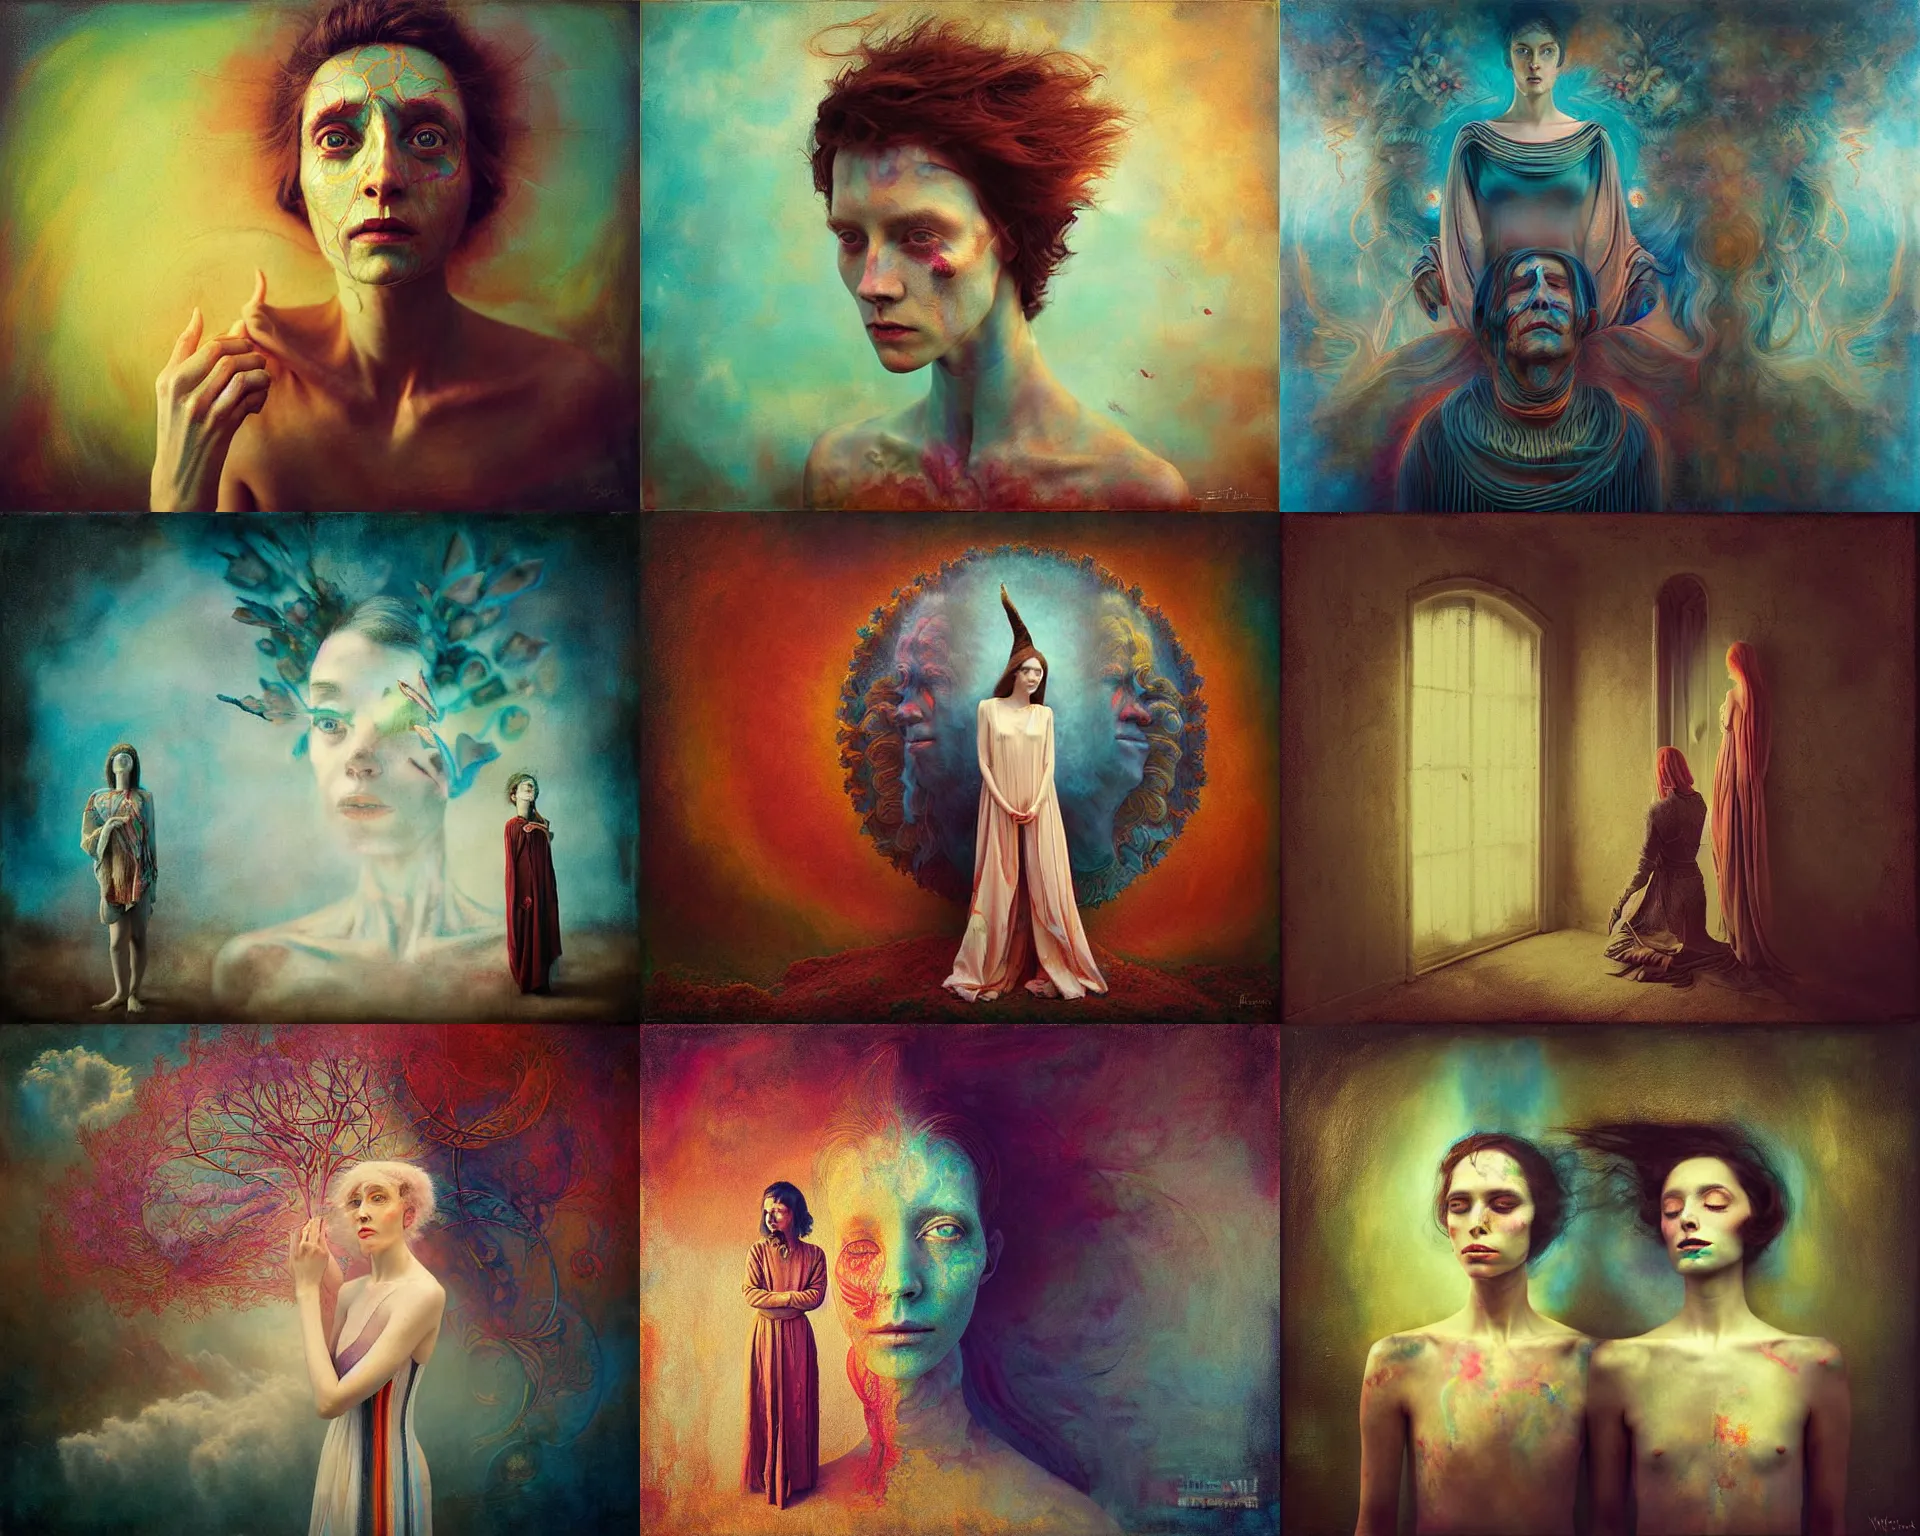 Prompt: the painting contains all of our inner selves by william higginson, kopera, anton fedeev, anka zhuravleva